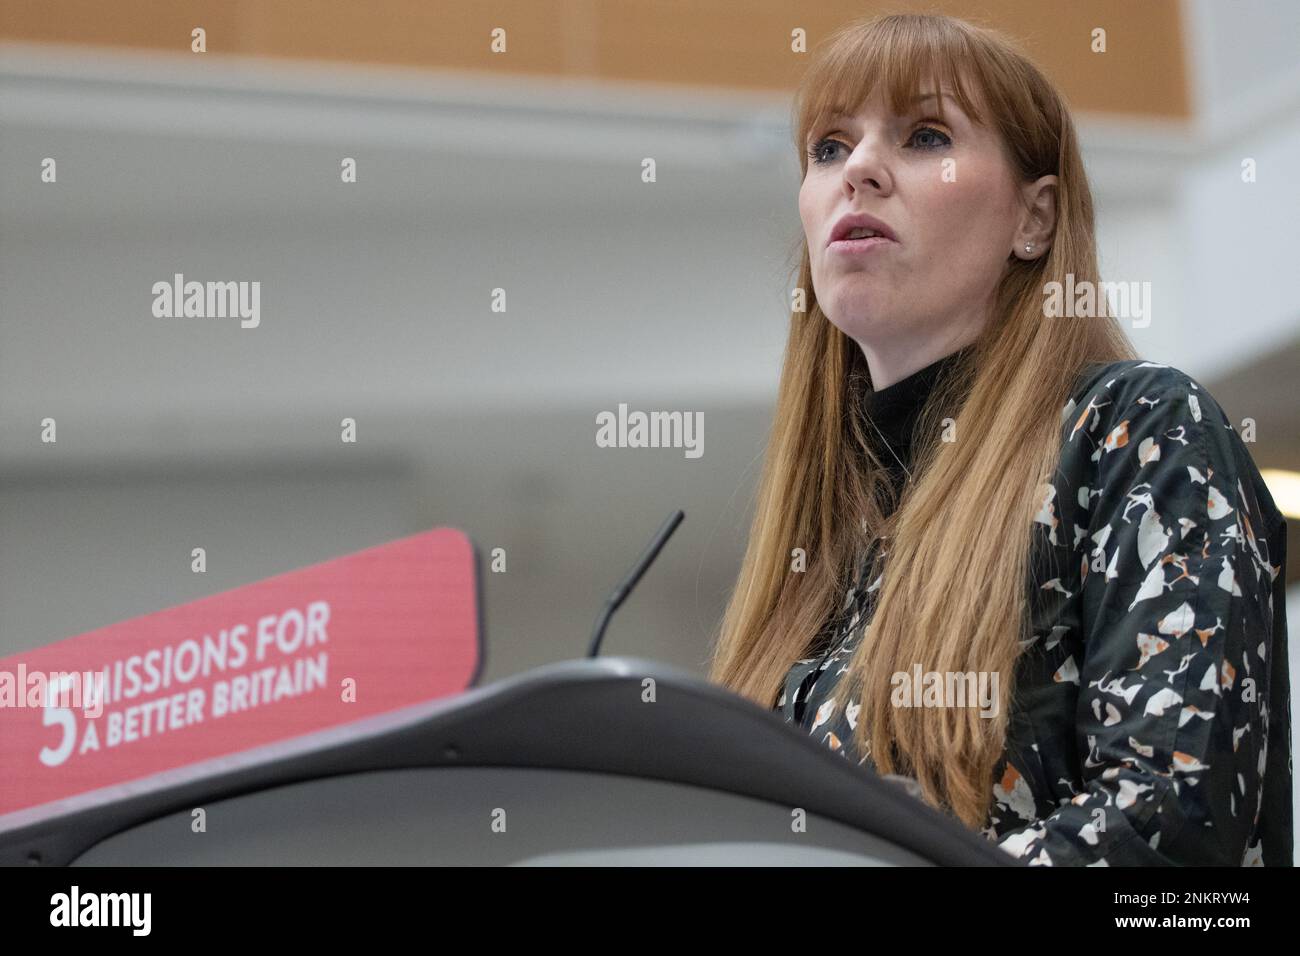 Manchester UK. 23/02/2023, Angela Rayner speaks before Keir Starmer launches five bold missions for a better Britain at 1 Angel Square, Manchester UK. The Labour leader spoke in front of shadow cabinet colleagues and manchester based politicians. He outlined the purpose of missions as. “It means providing a clear set of priorities”.  A relentless focus on the things that matter at can ‘fix the fundamentals.” Picture: garyroberts/worldwidefeatures.com Stock Photo